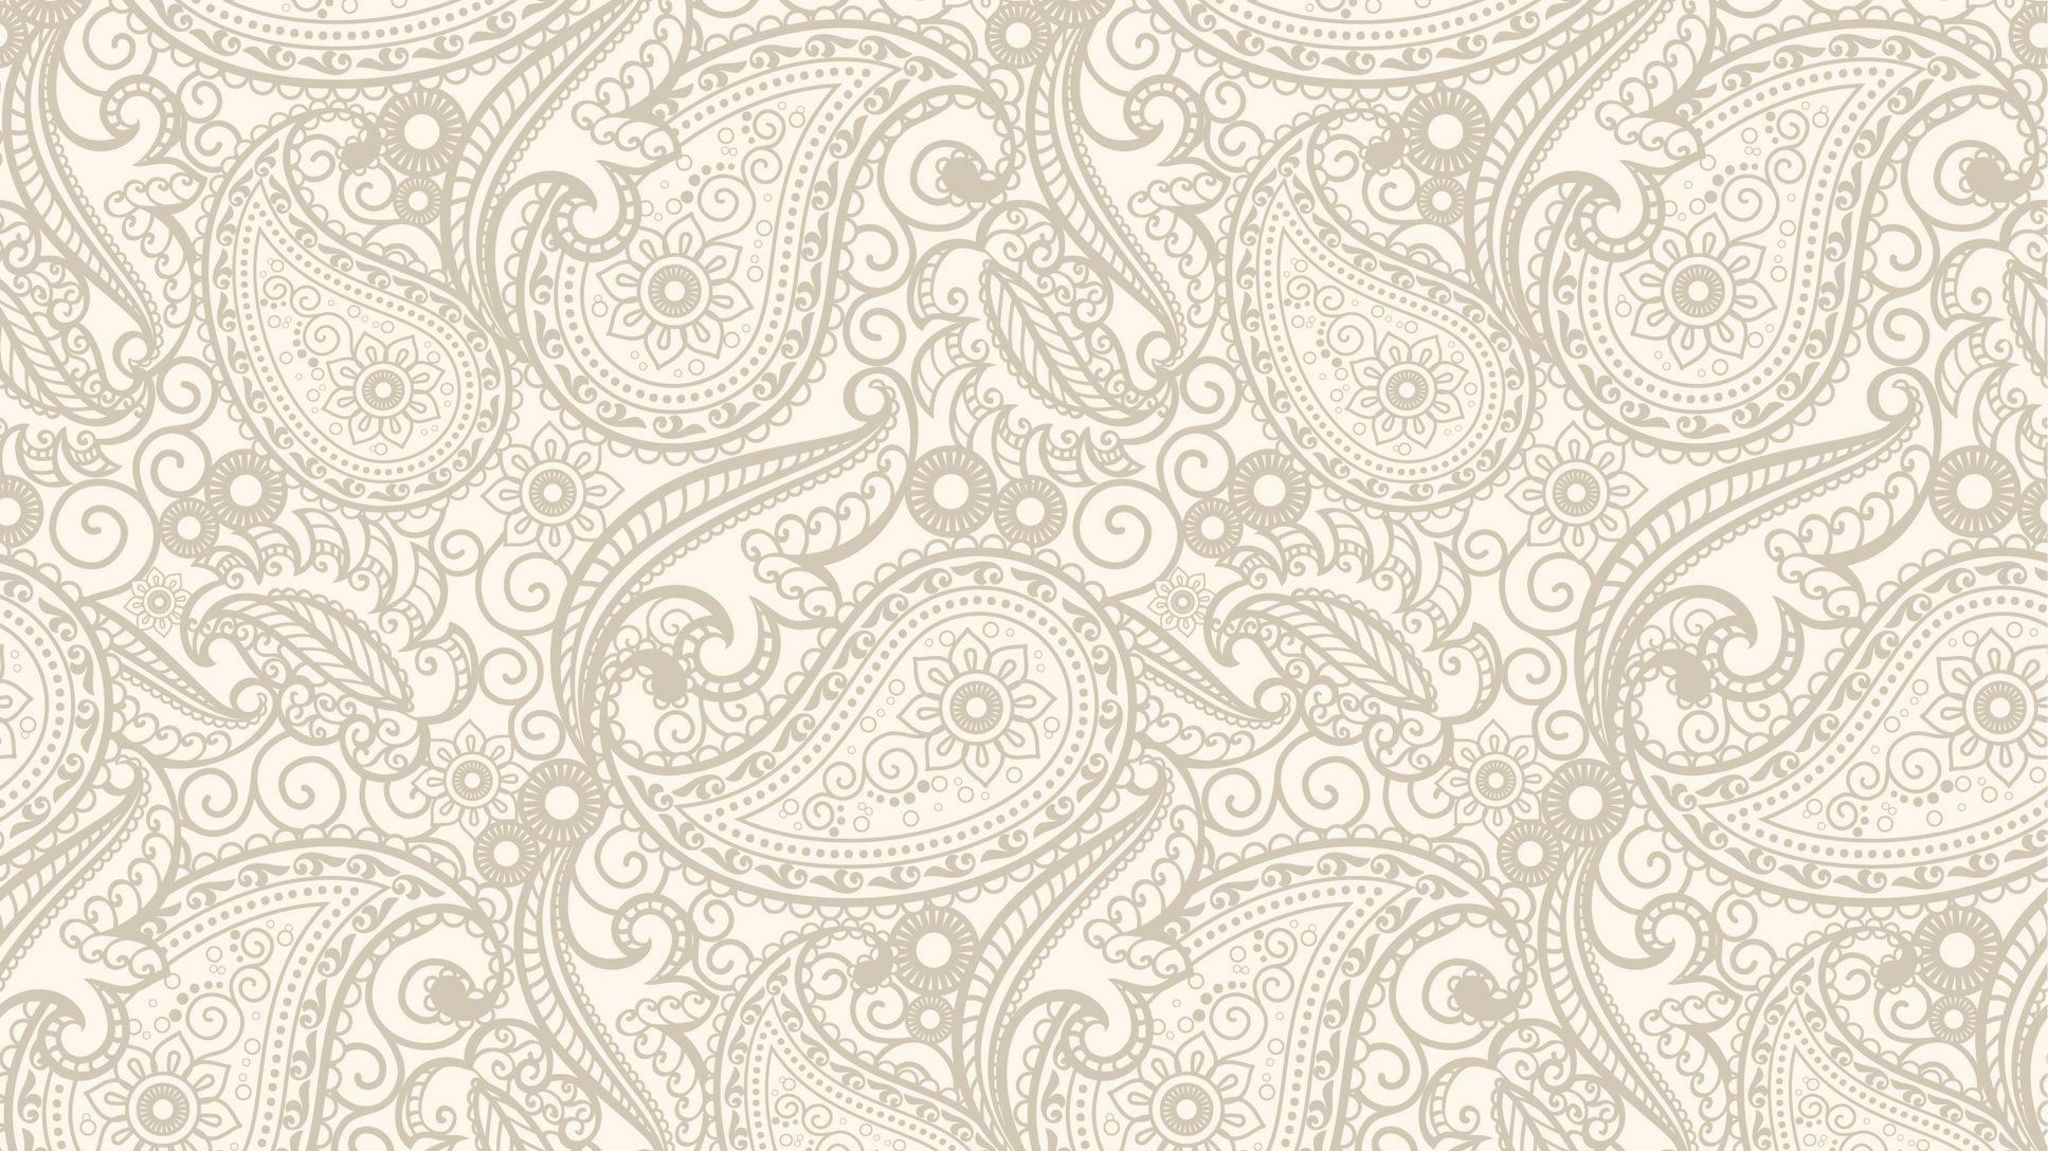 Gold and cream swirling and floral paisley pattern